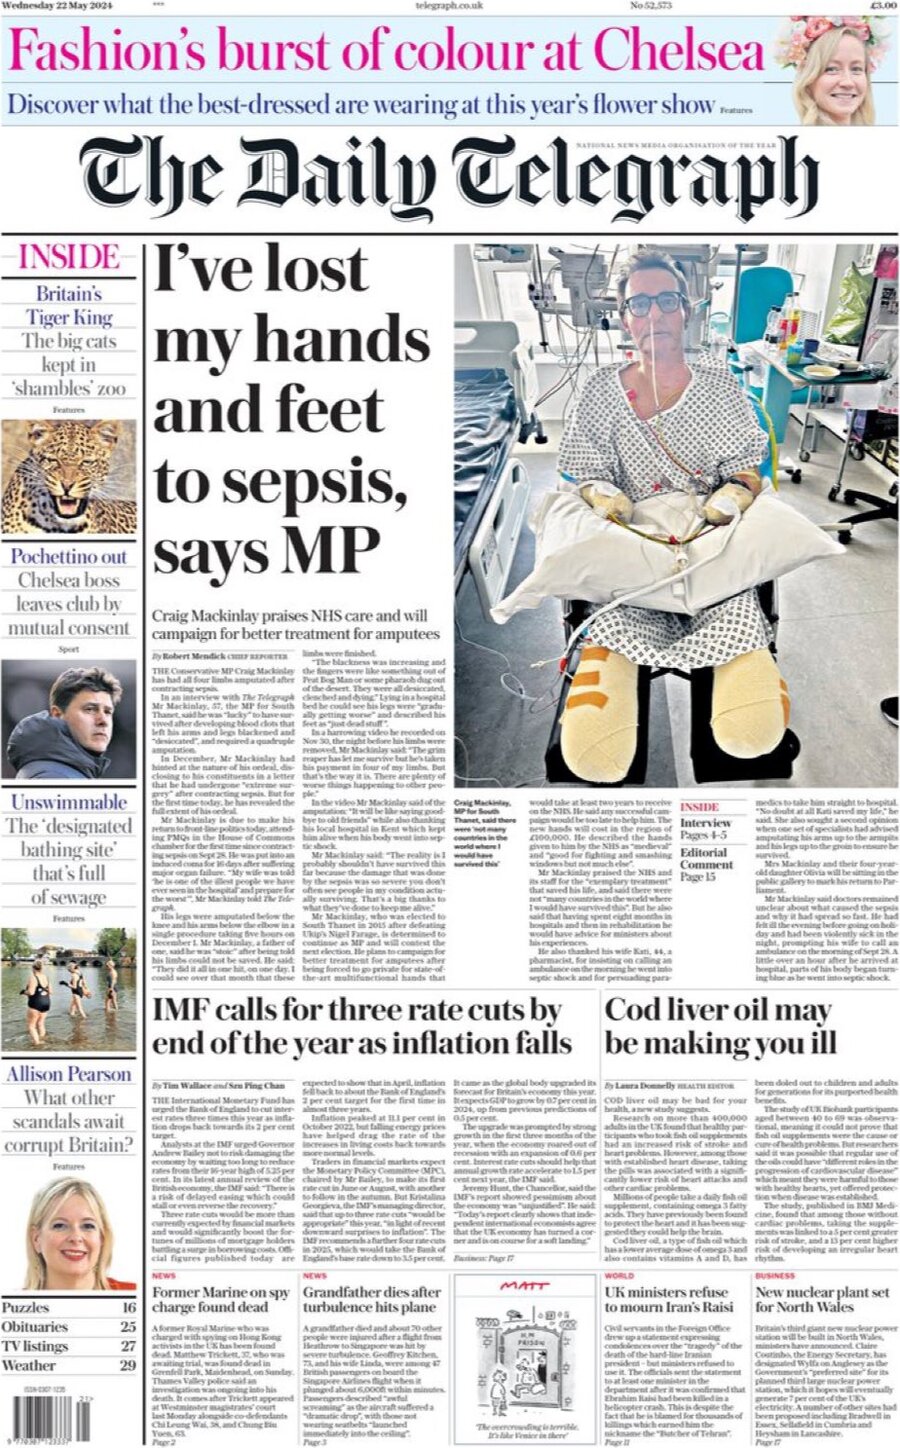 The Daily Telegraph - Front Page - 05/22/2024